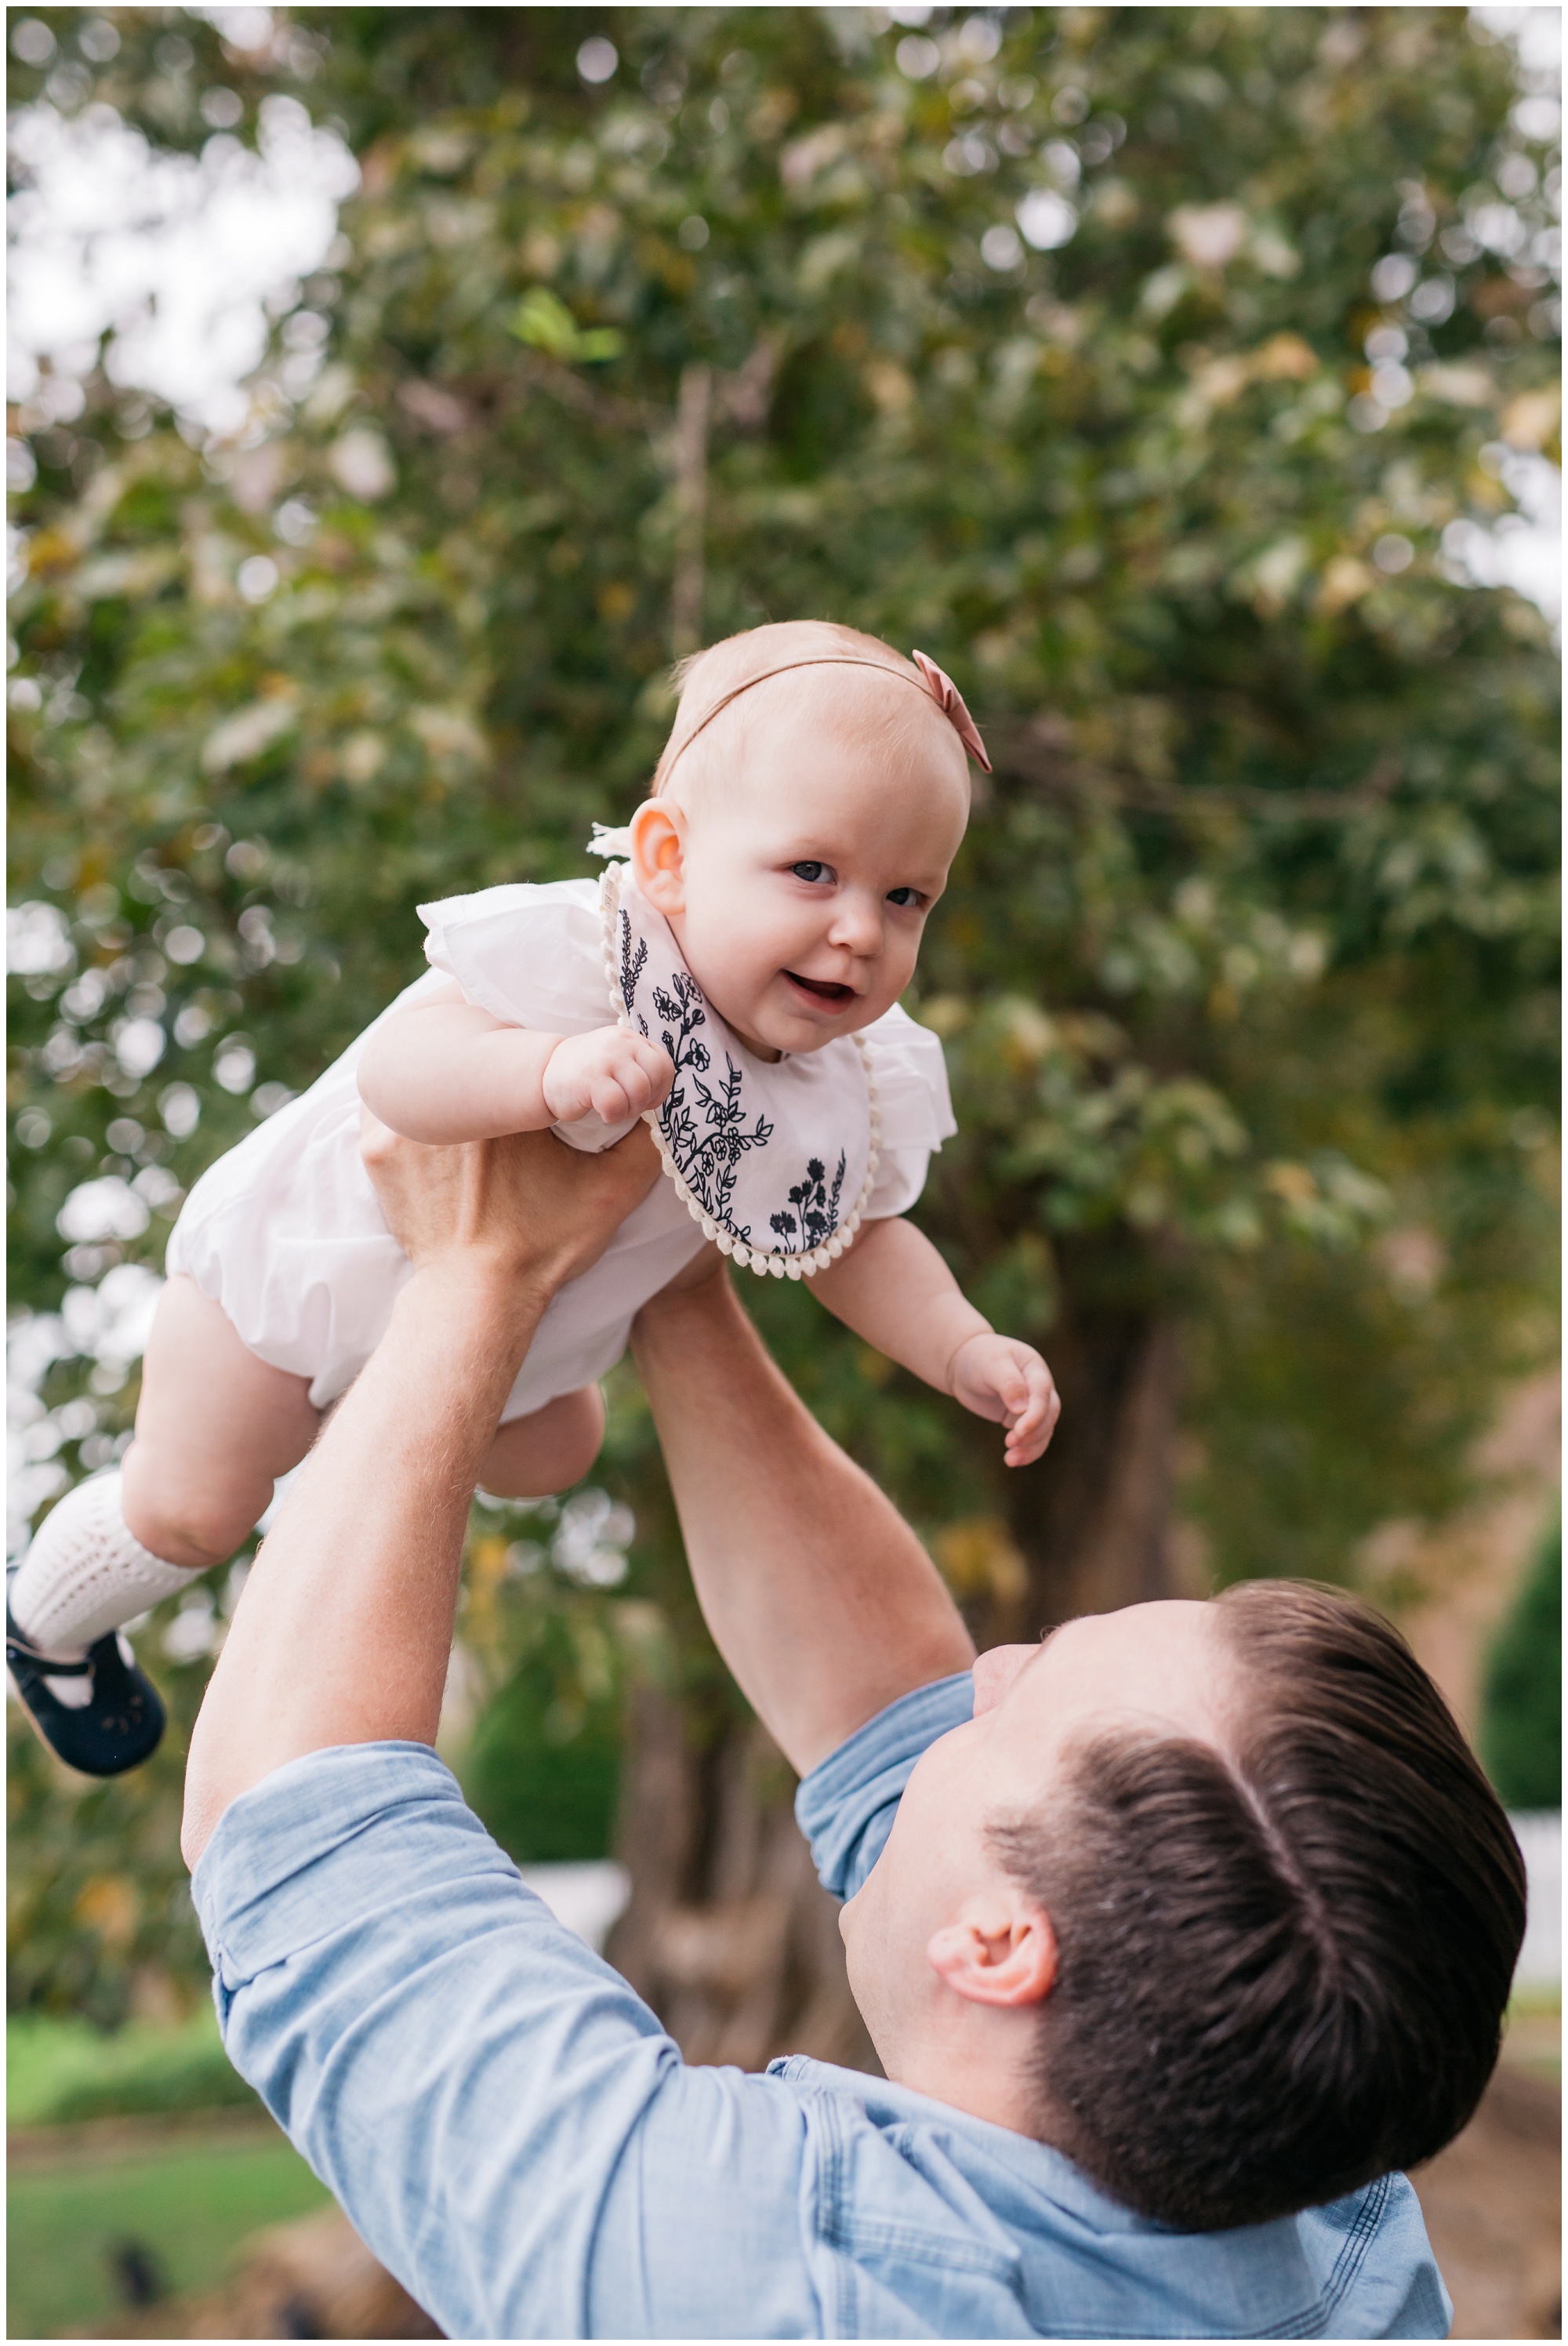 Nashville Fall Mini Sessions at Carnton Plantation in Franklin, TN by family photographer Meredith Teasley